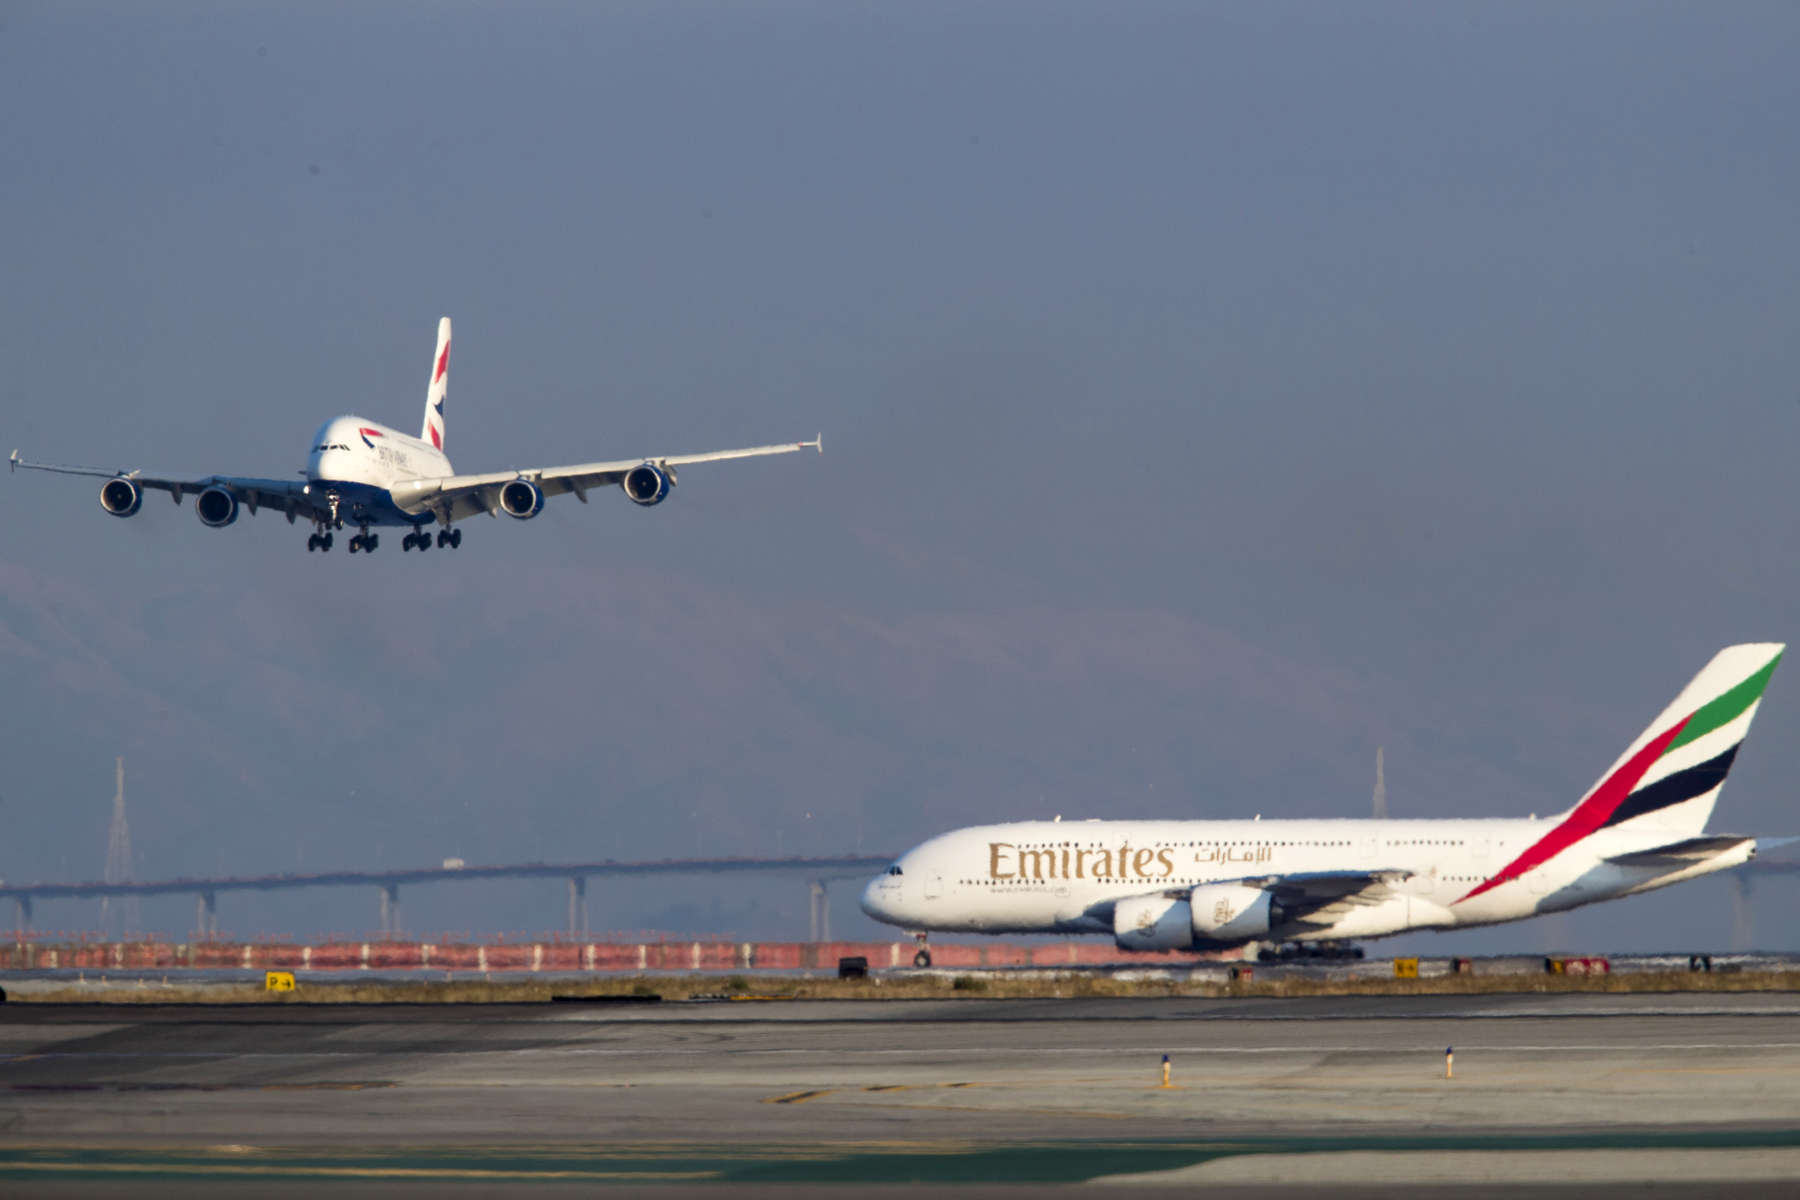 SFO Runway Expansions